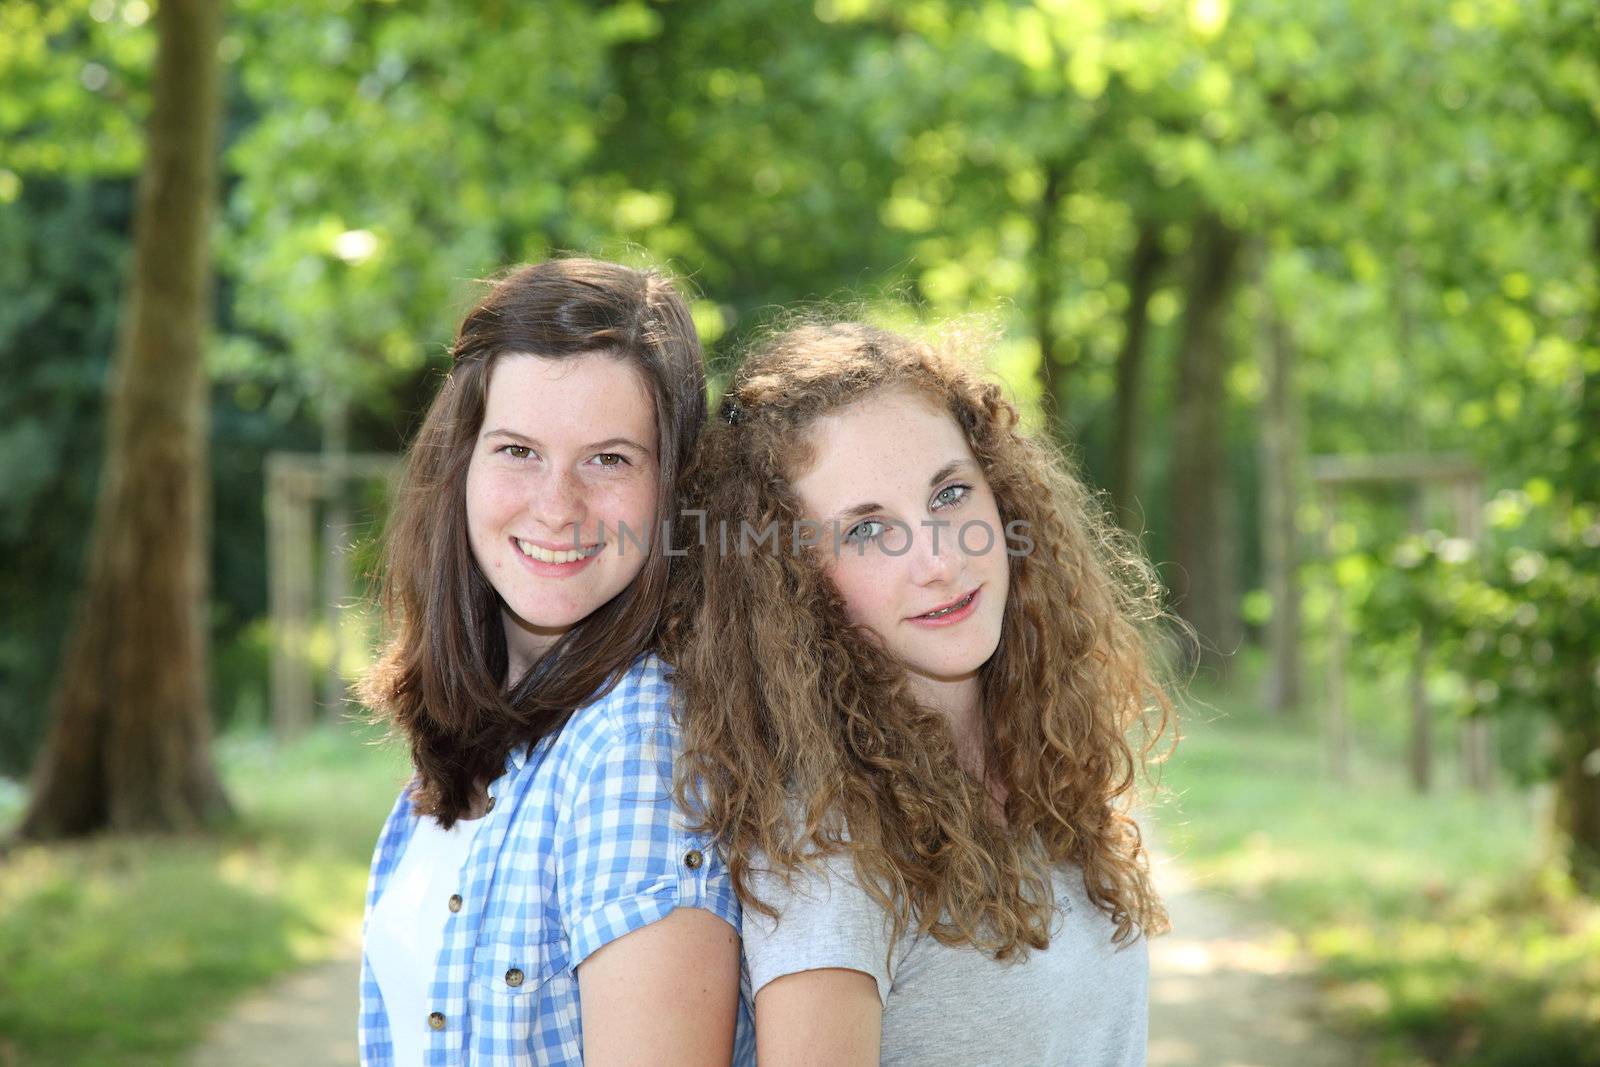 Two pretty healthy teenager girls smiling and posing back to back on an alley in a green forested area, in summer